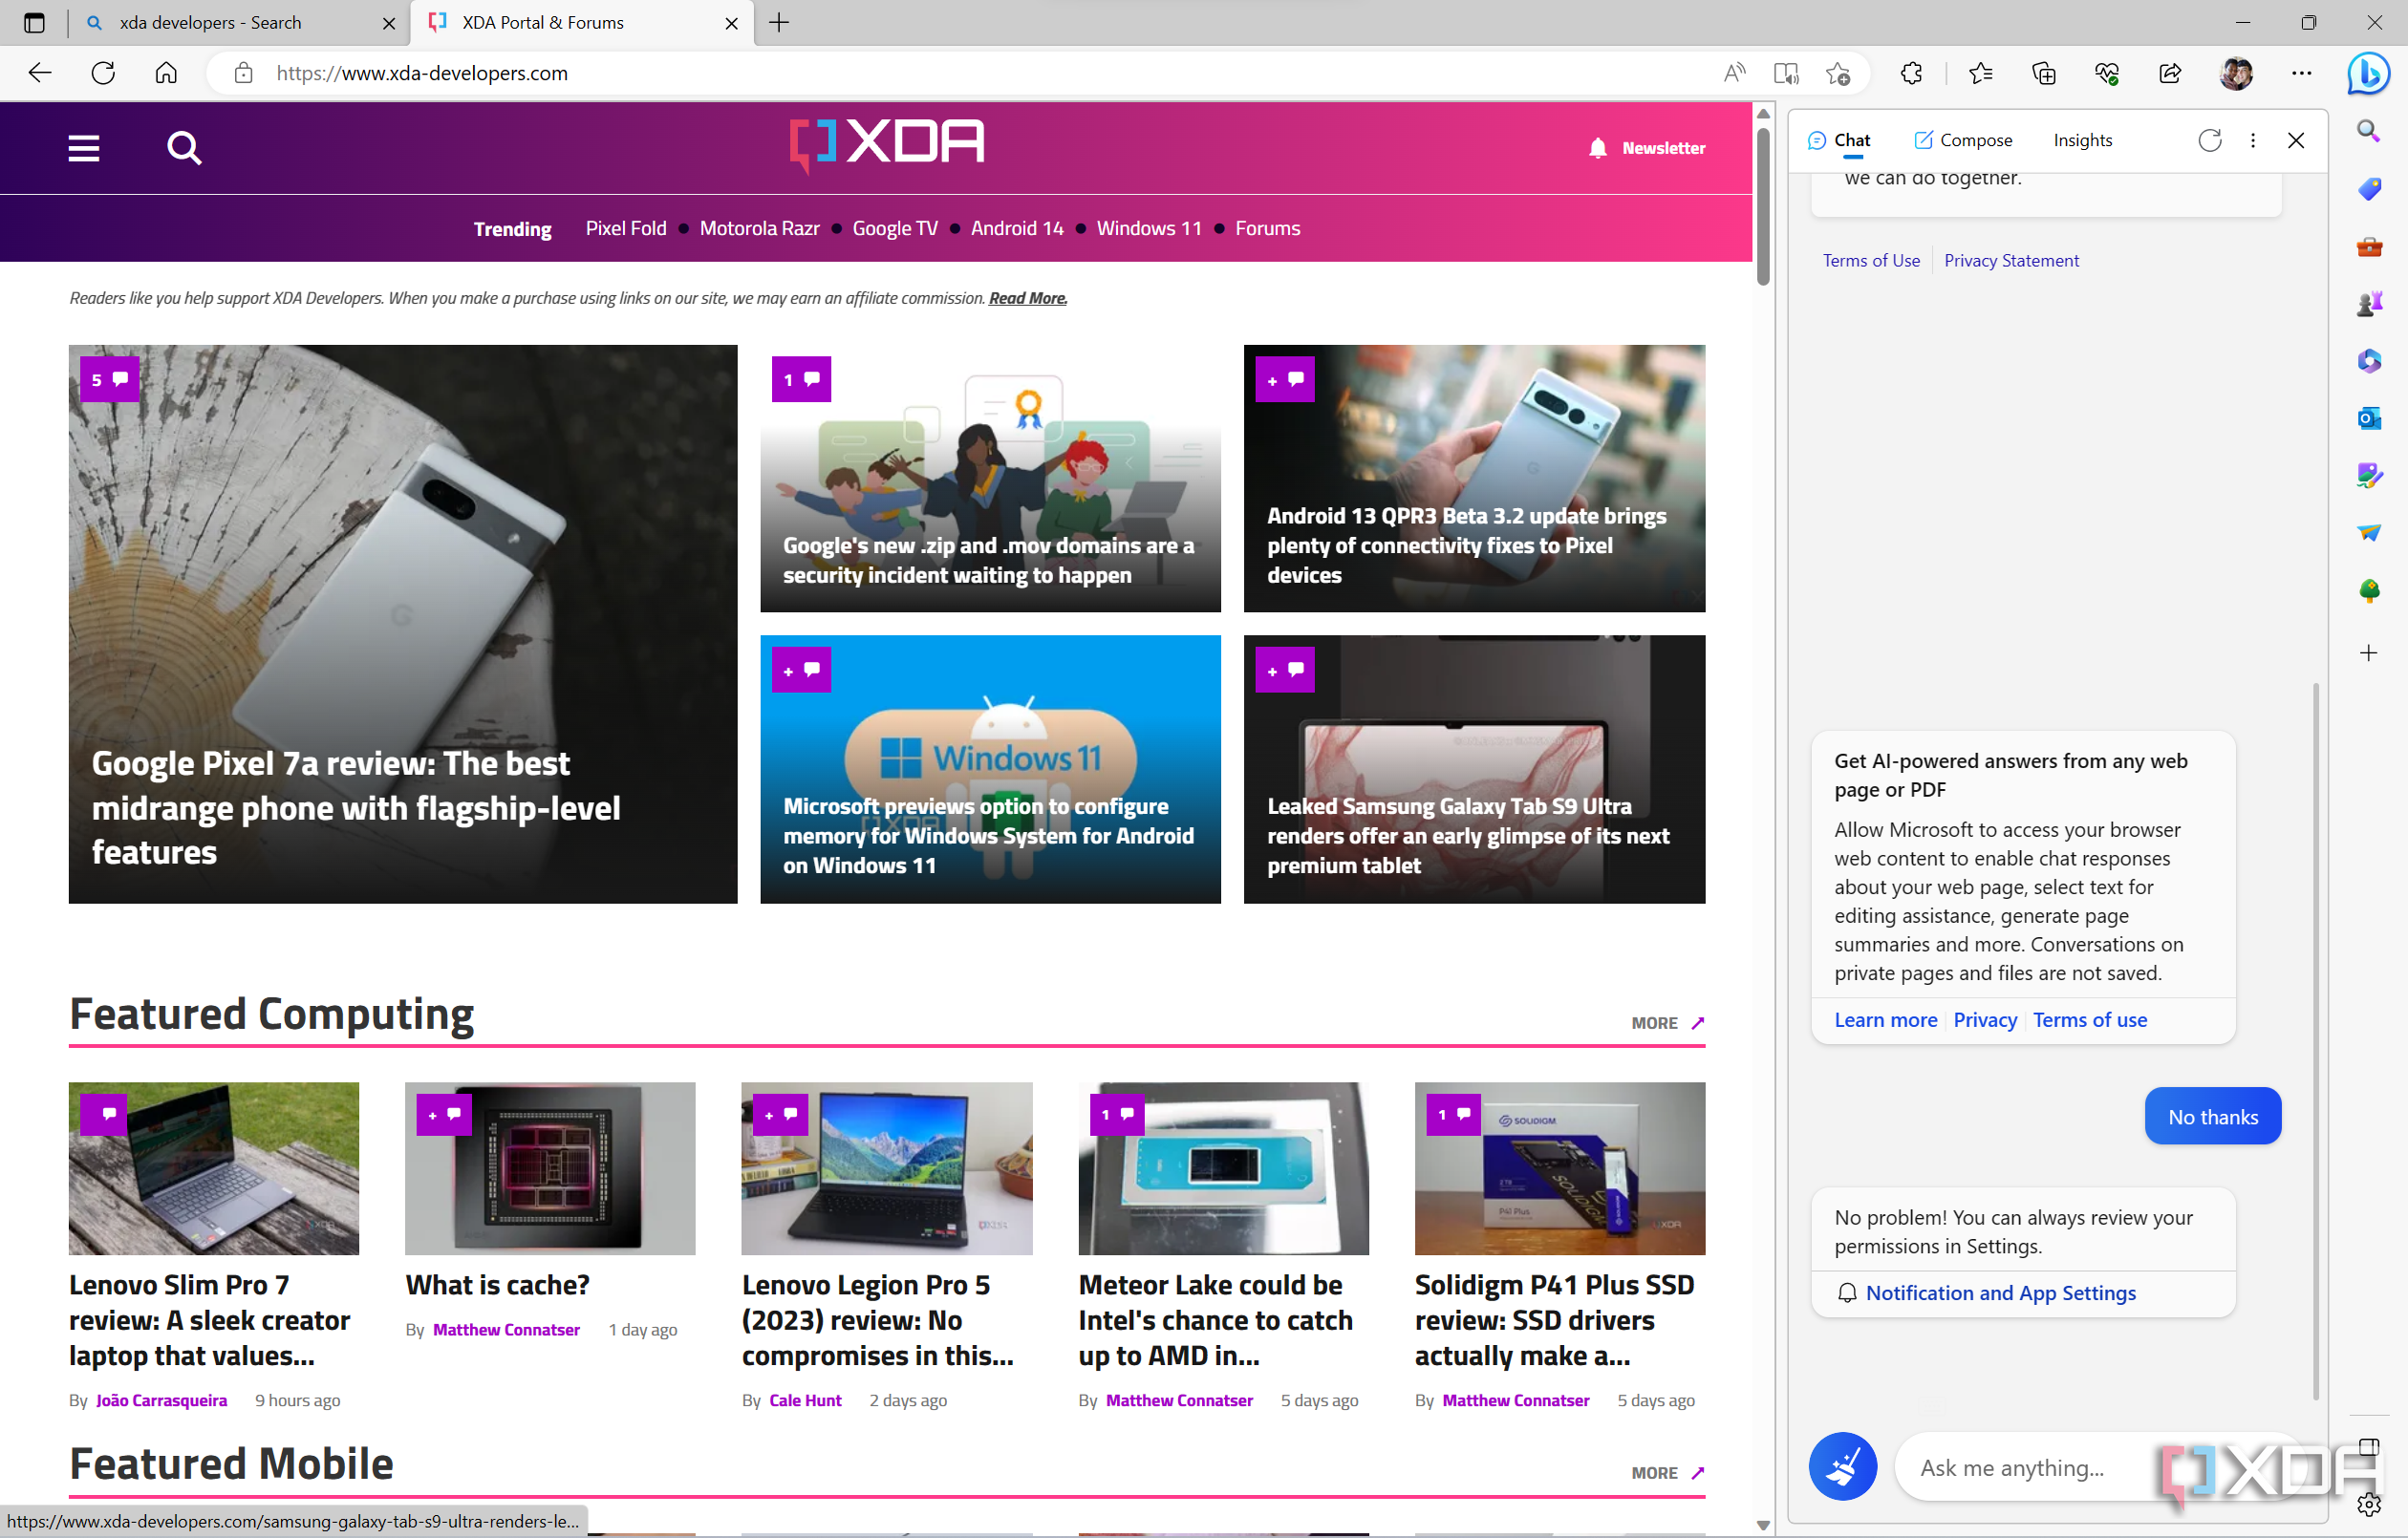 Screenshot of Microsoft Edge showing the XDA homepage and the Bing sidebar open on the Compose panel